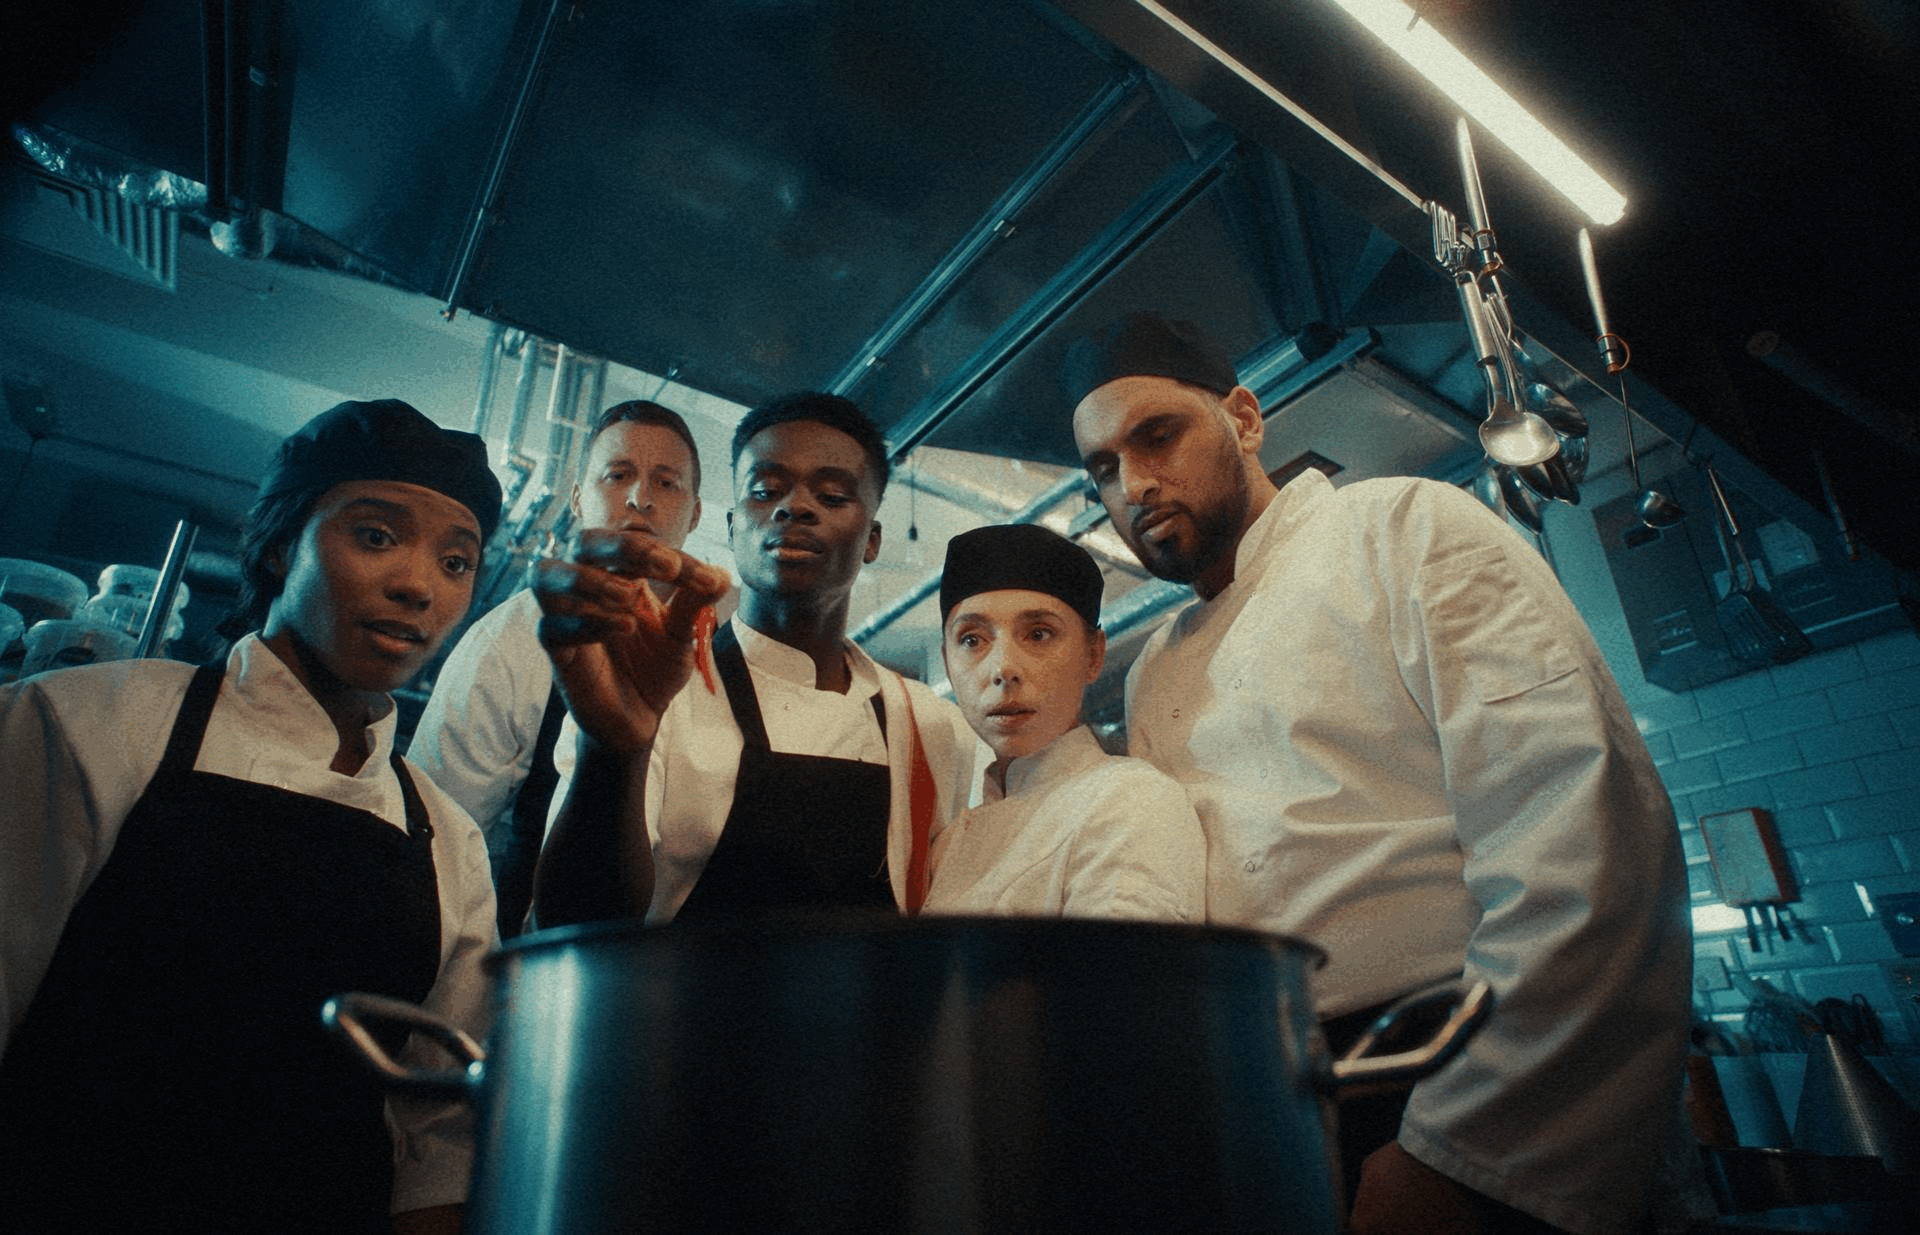 WATCH: Nandos enlists Bukayo Saka as head chef of new sauce in multichannel campaign